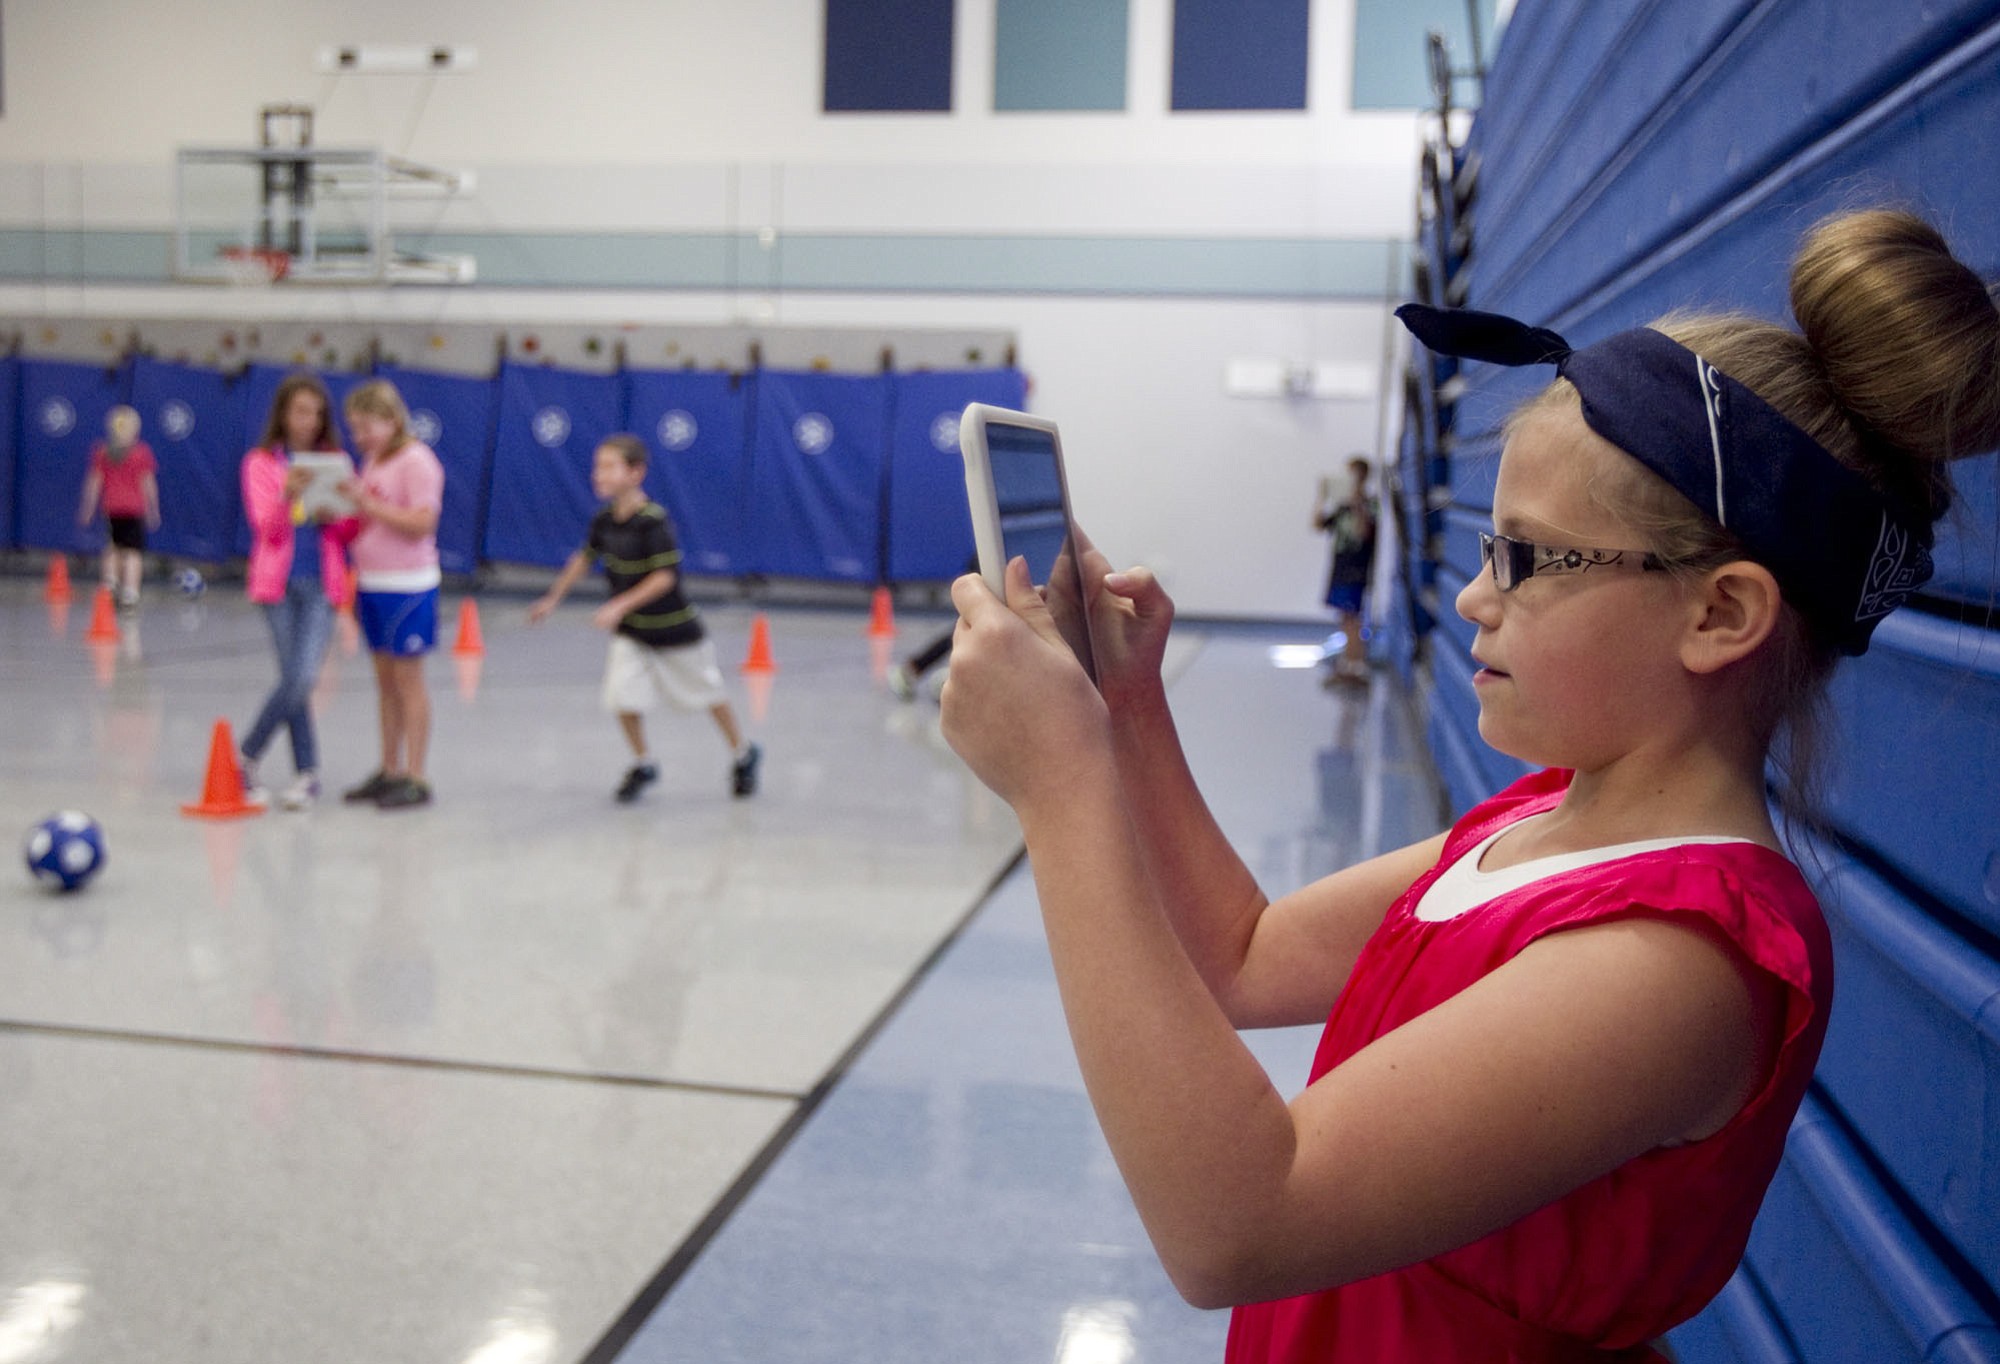 Ten-year-old Olivia Kessinger uses an iPad in a PE class on Oct. 7 at Gause Elementary in Washougal.